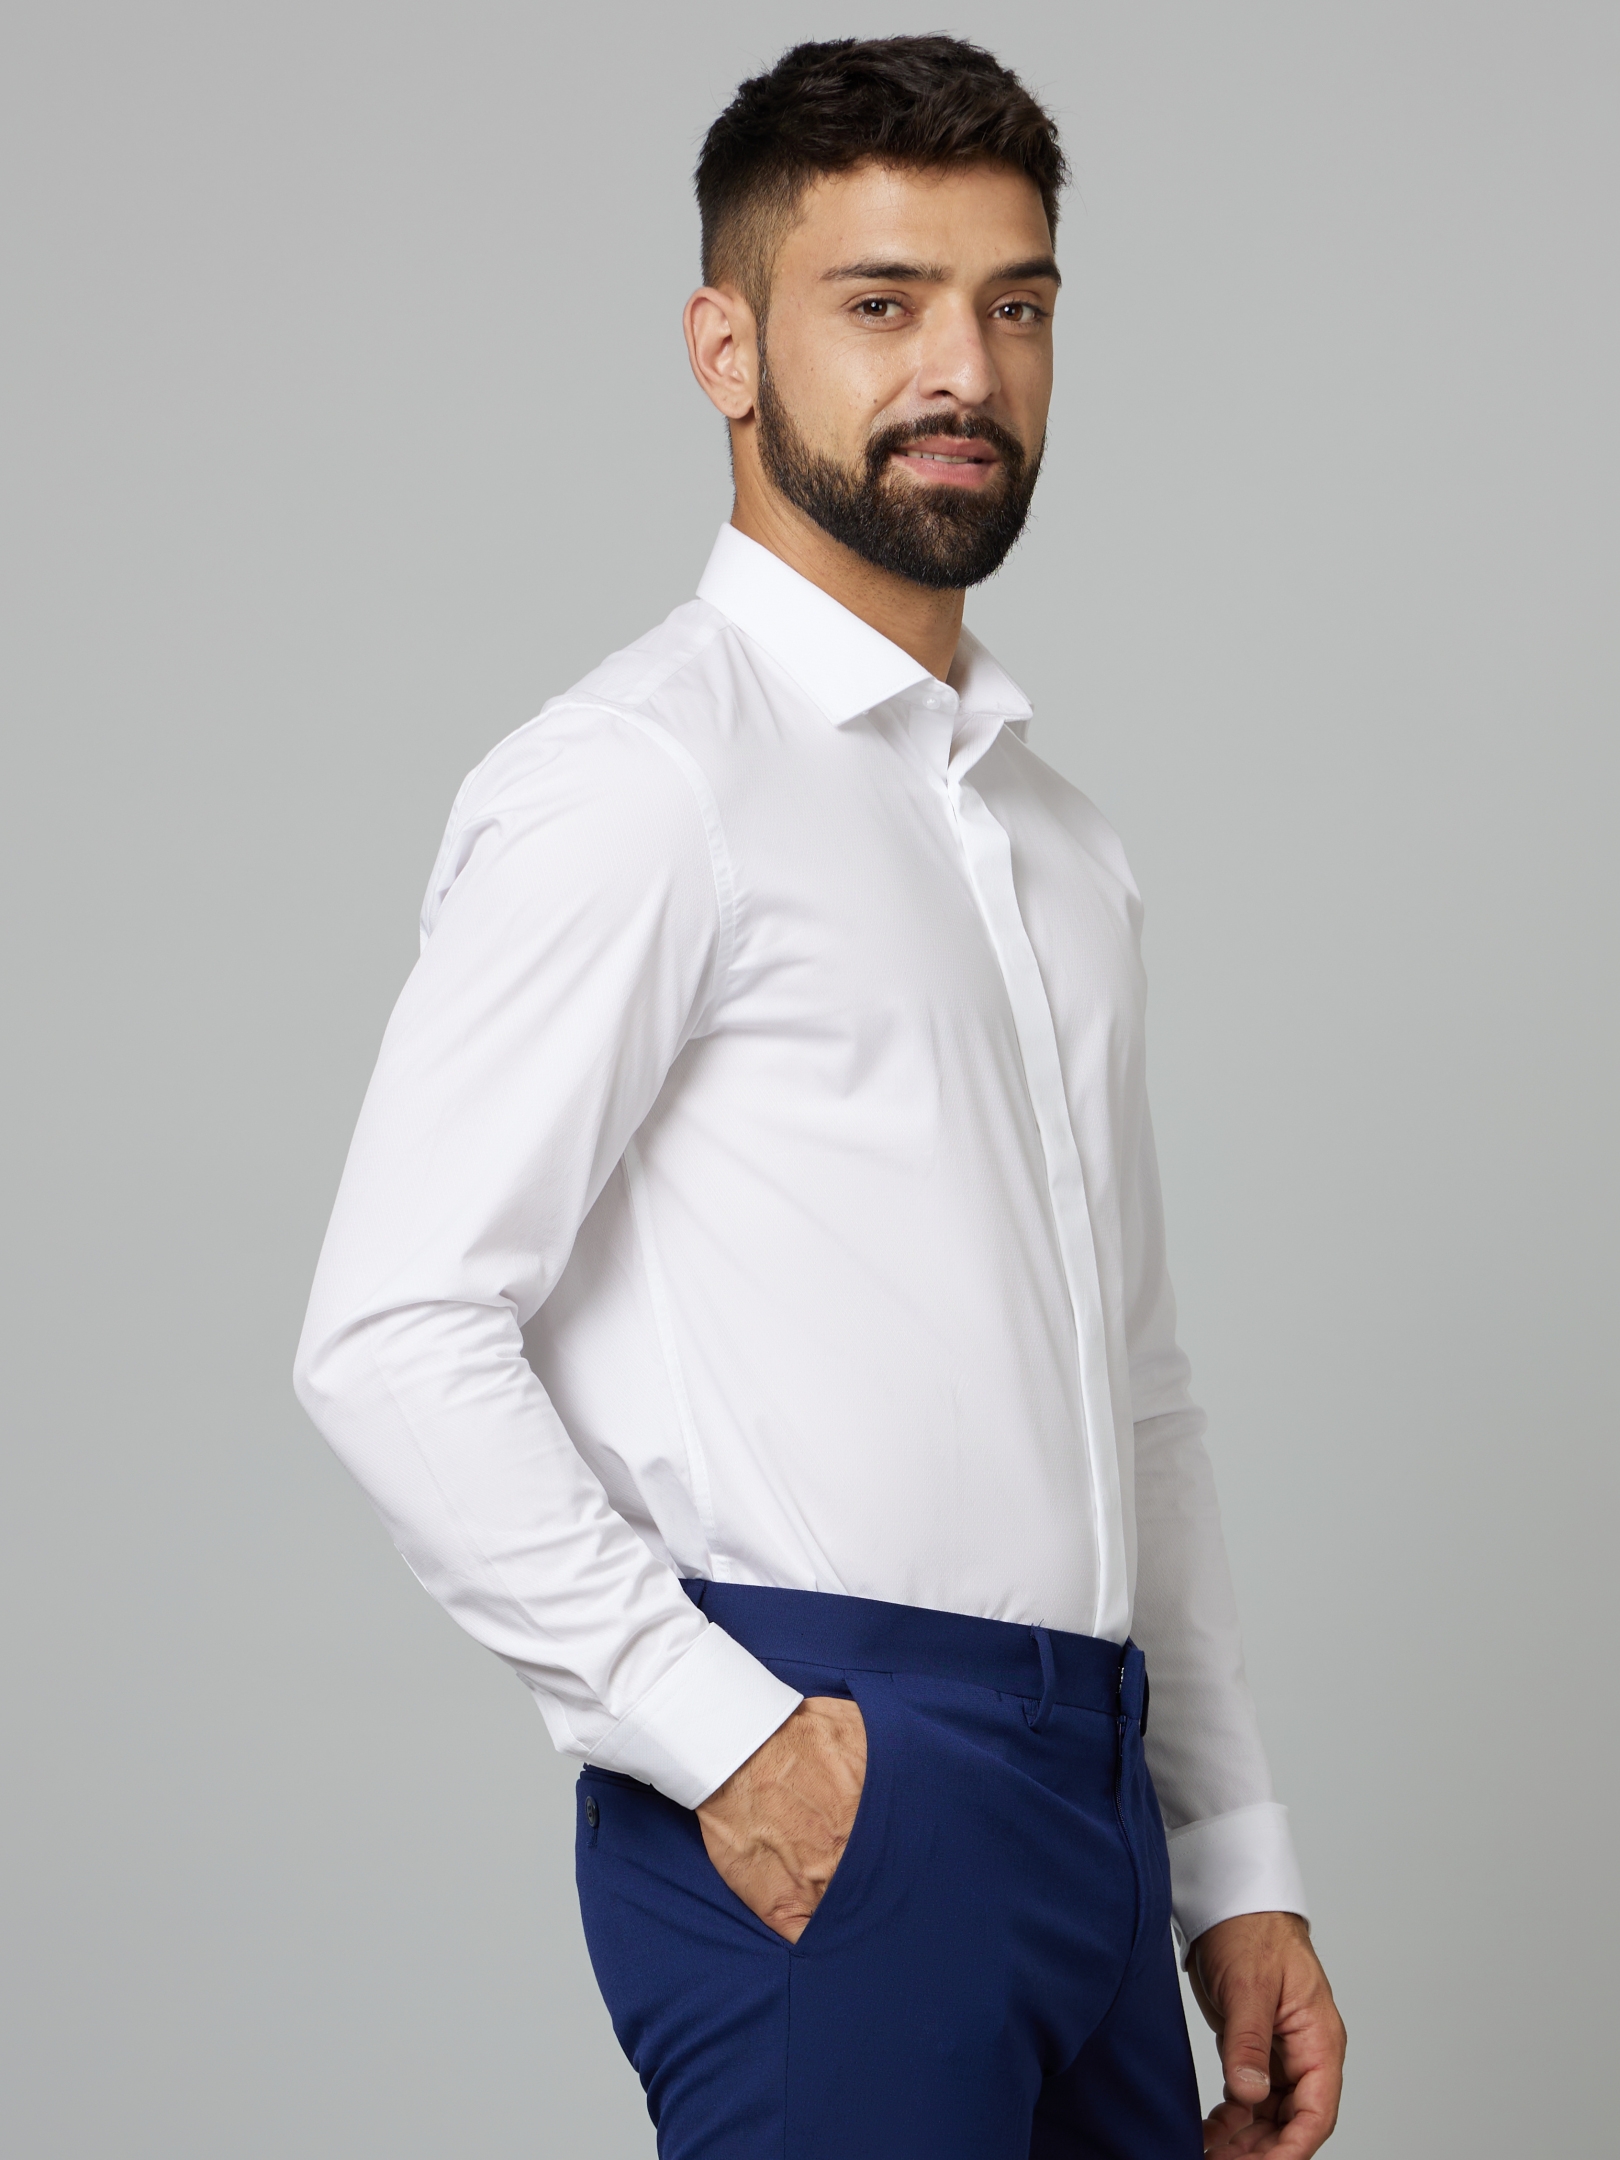 Men's White Solid Formal Shirts